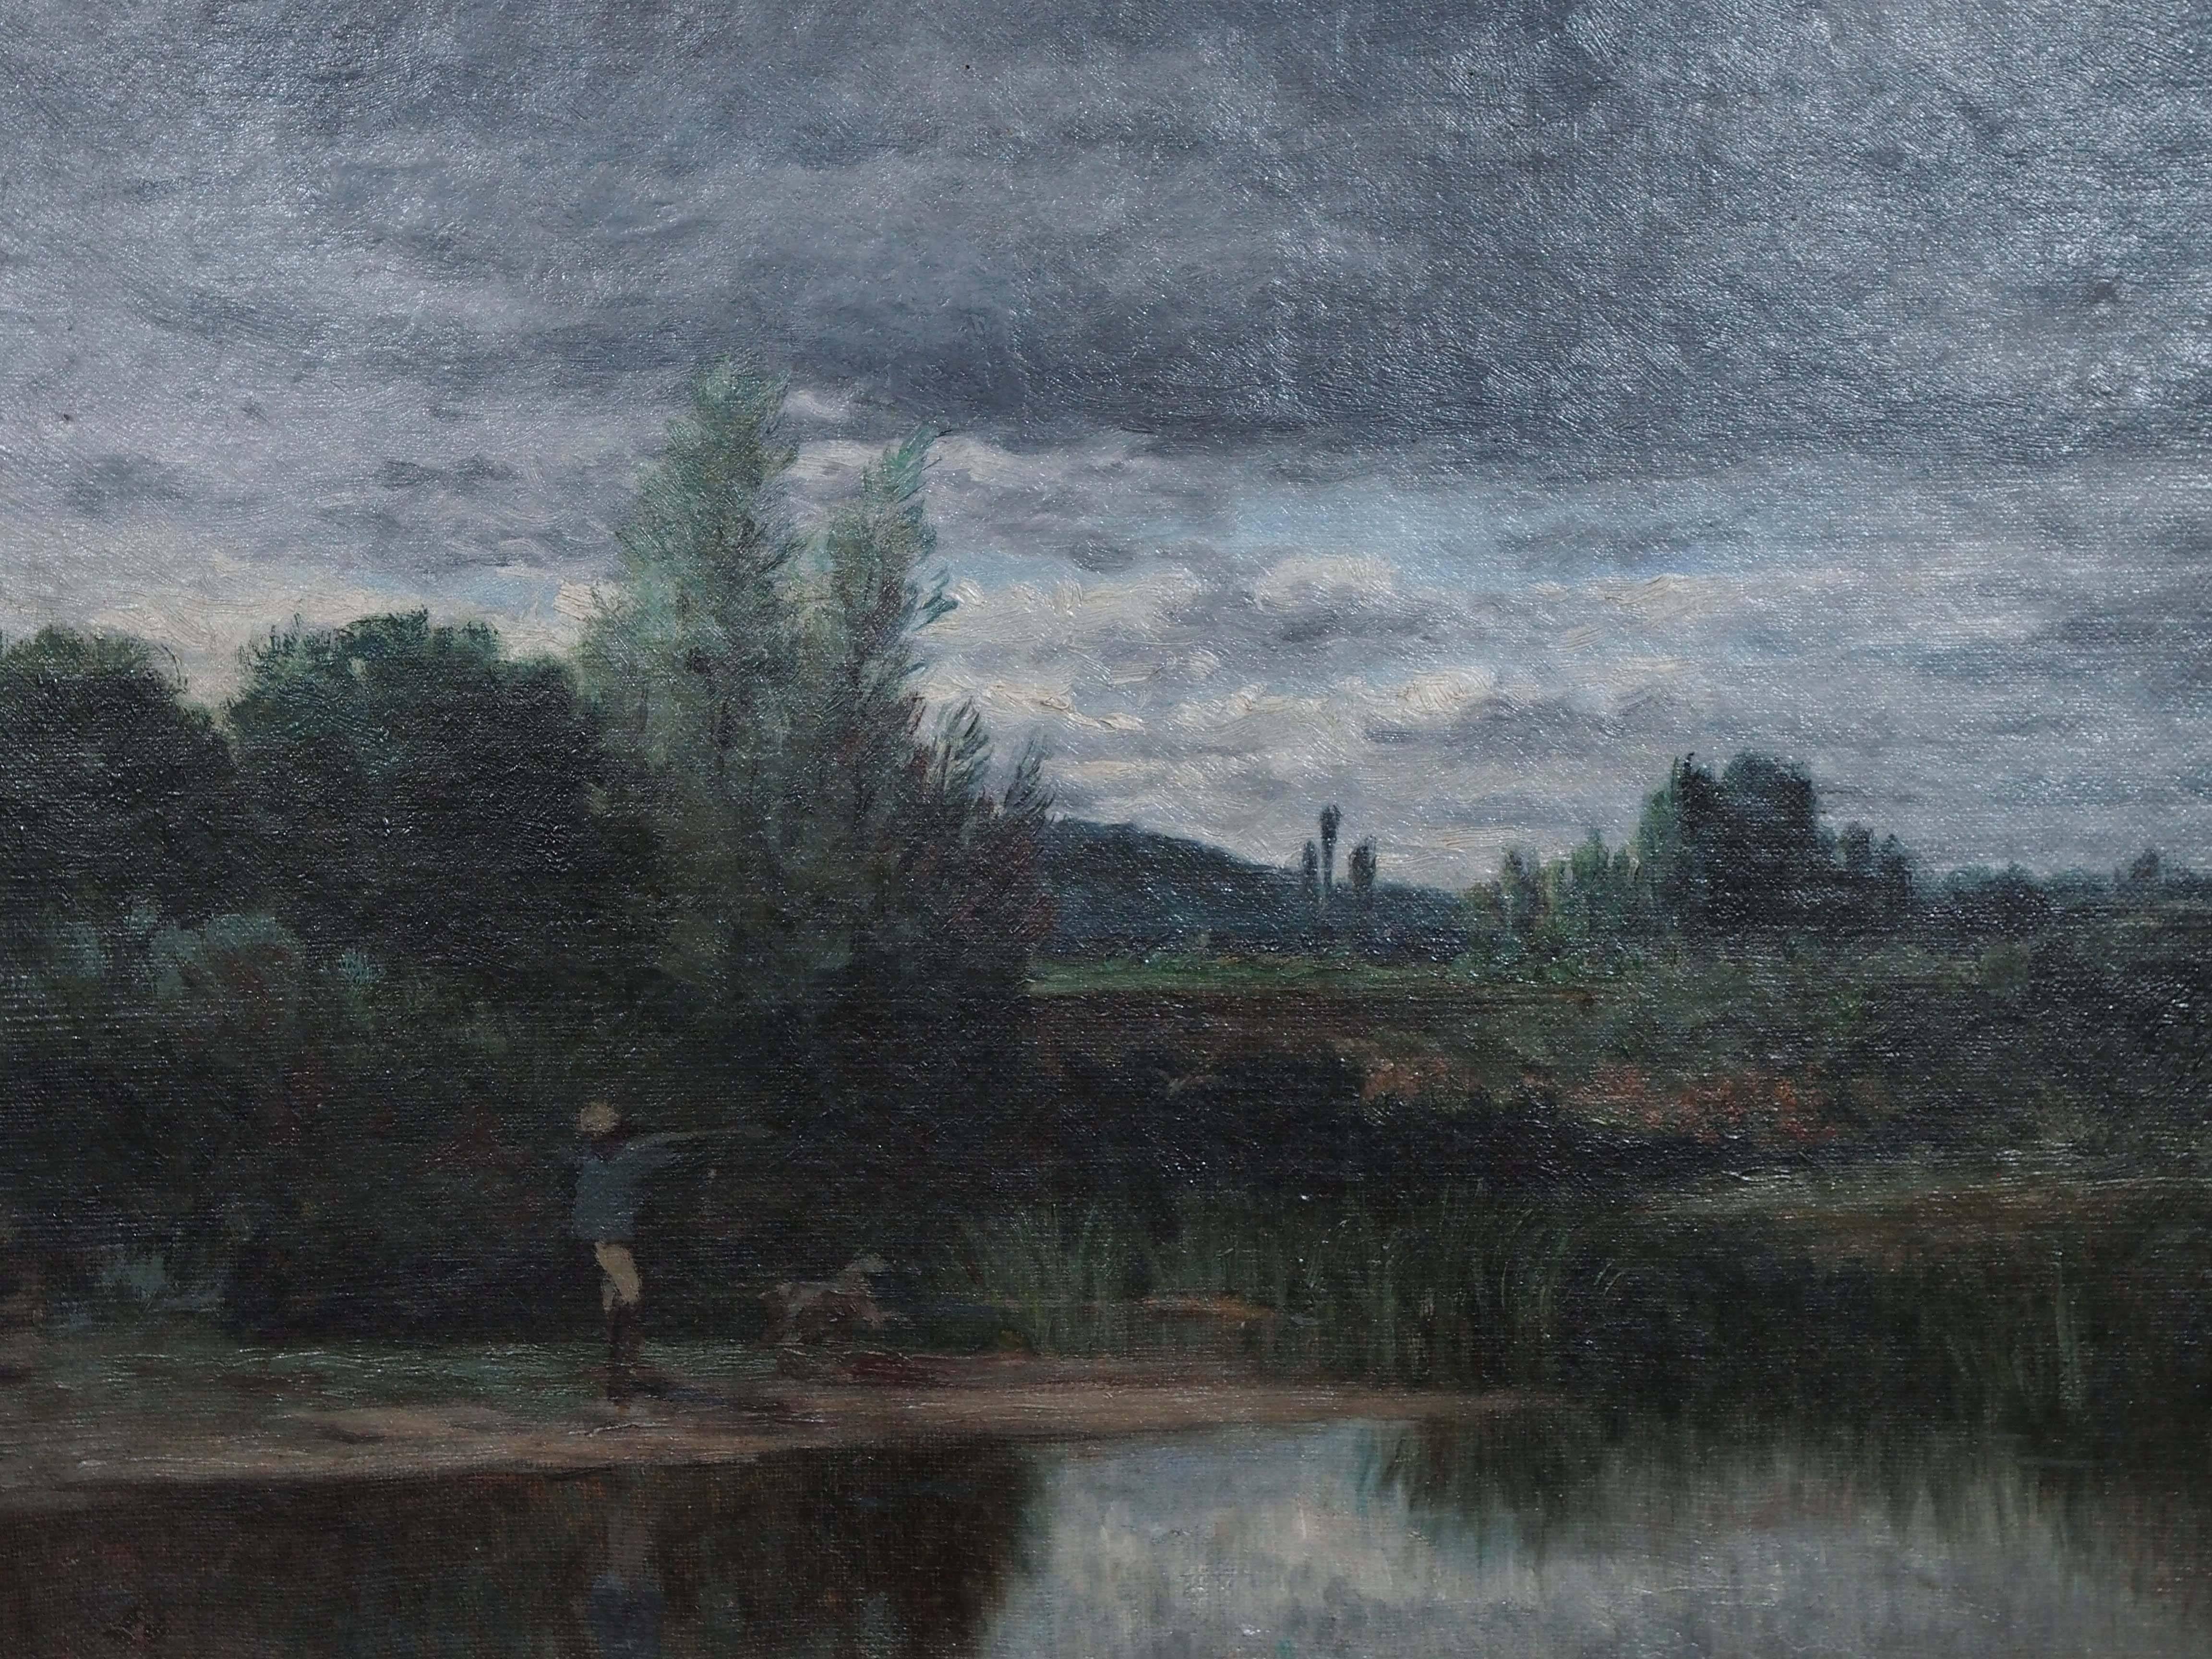 19th century French Barbizon school oil on canvas. View of a river bend with fisherman and dog. In period gilt frame.
Image size is 15.5 W x 11.5 H without frame.